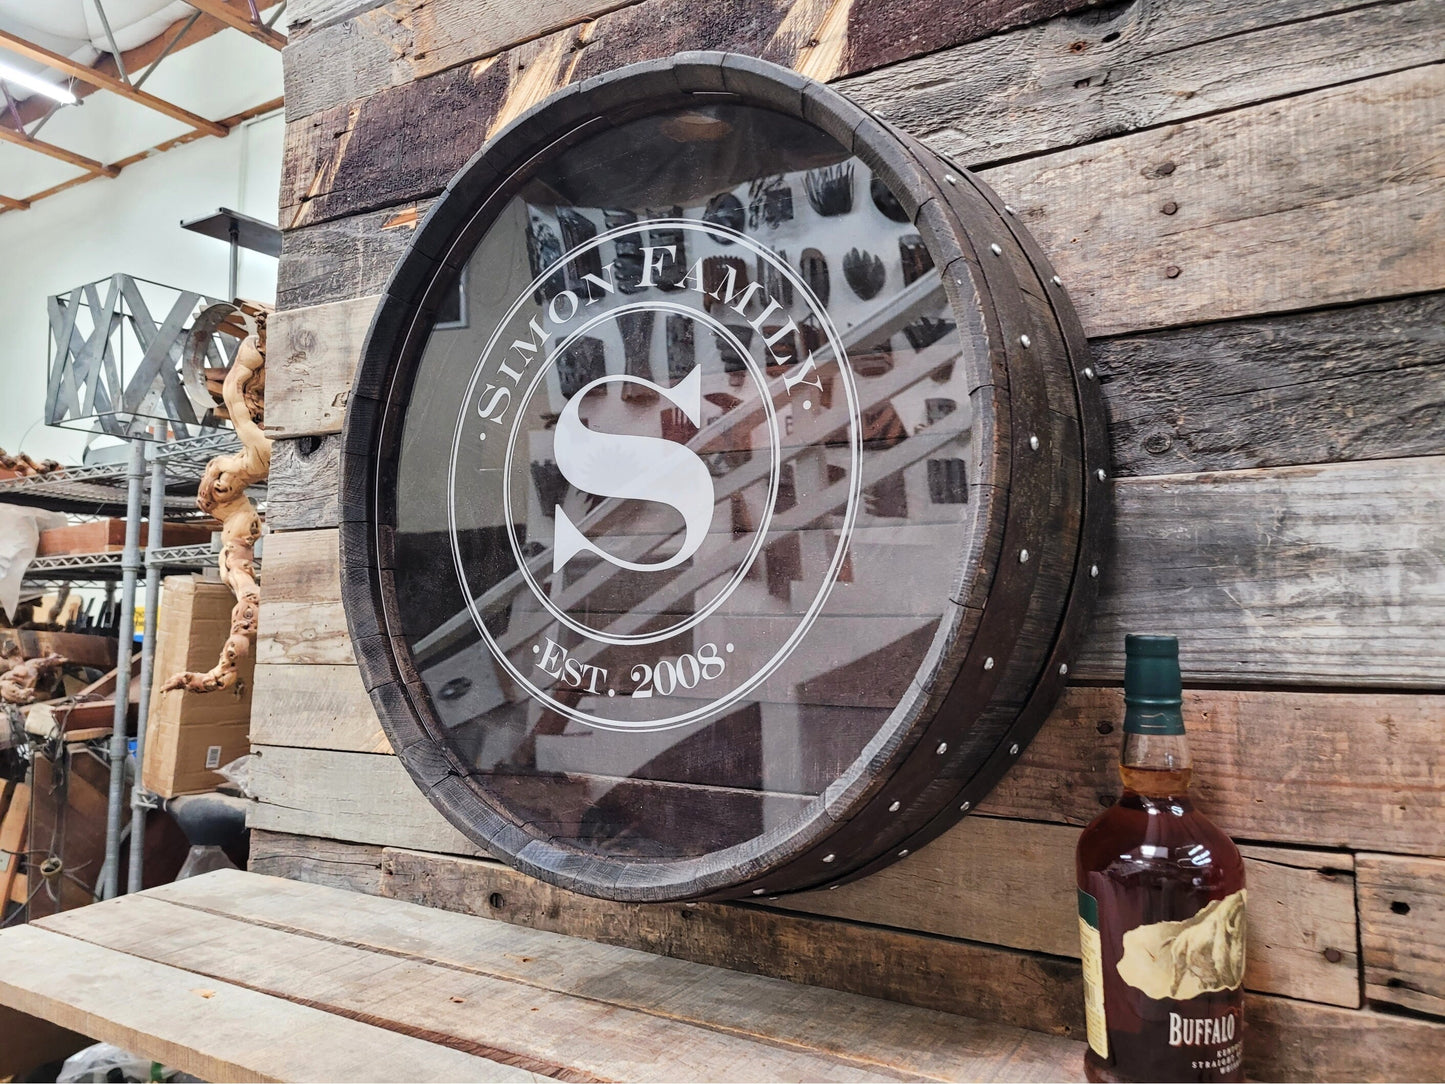 Whisky Wall Mounted Bottle + Cork Display - Kuvada - Retired Whiskey barrel with custom personalized engraving!